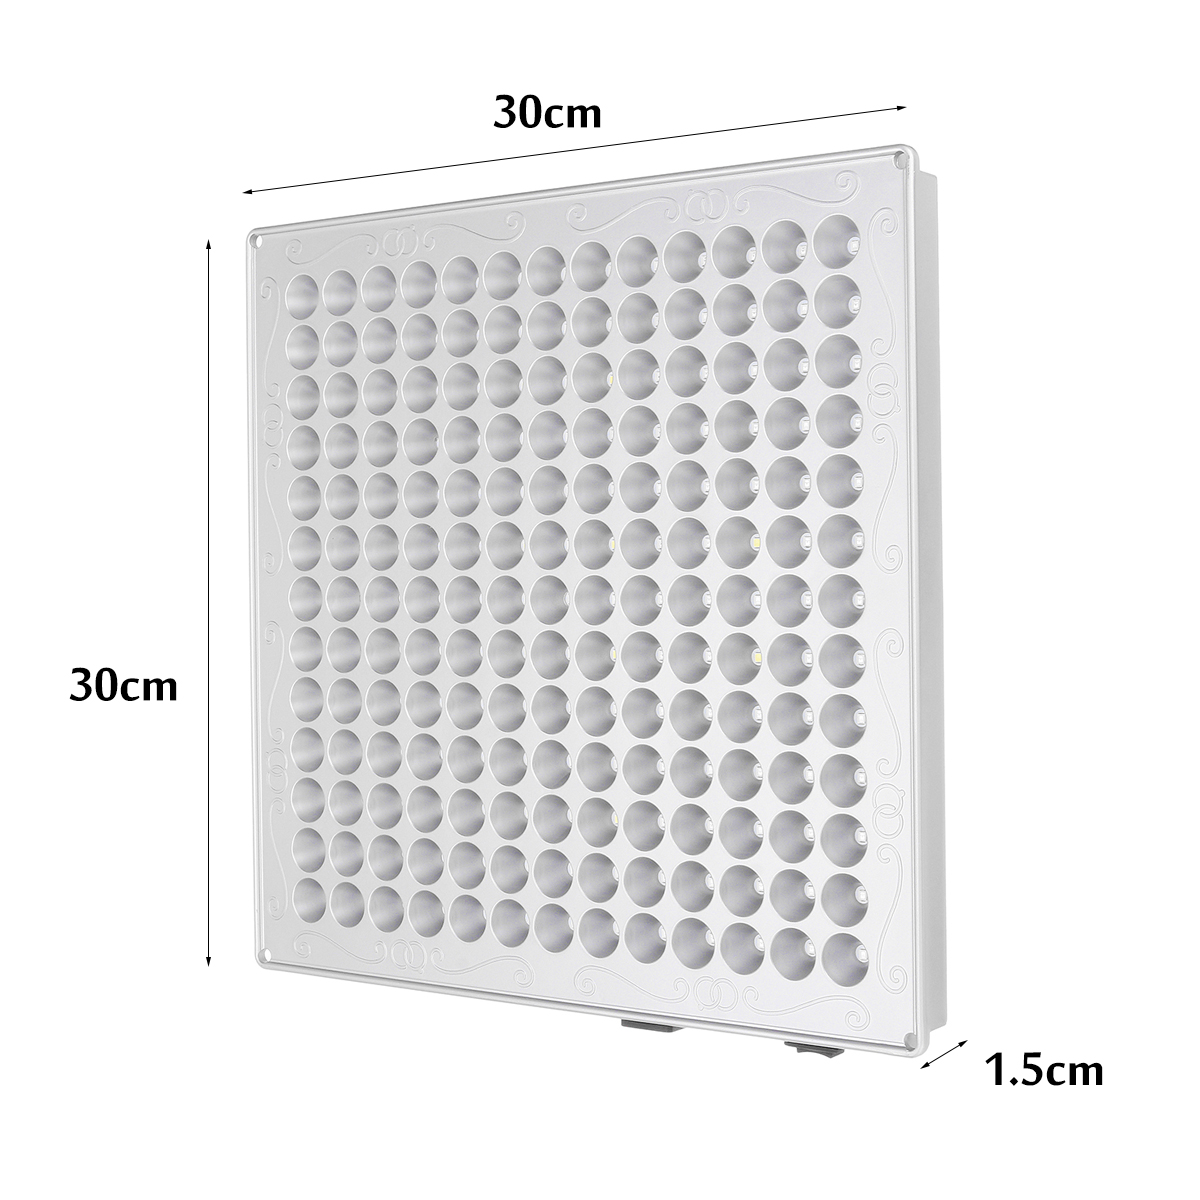 169LED-LED-Grow-Plant-Light-Full-Spectrum-Hydroponic-Panel-Lamp-Growing-Indoor-1816512-12